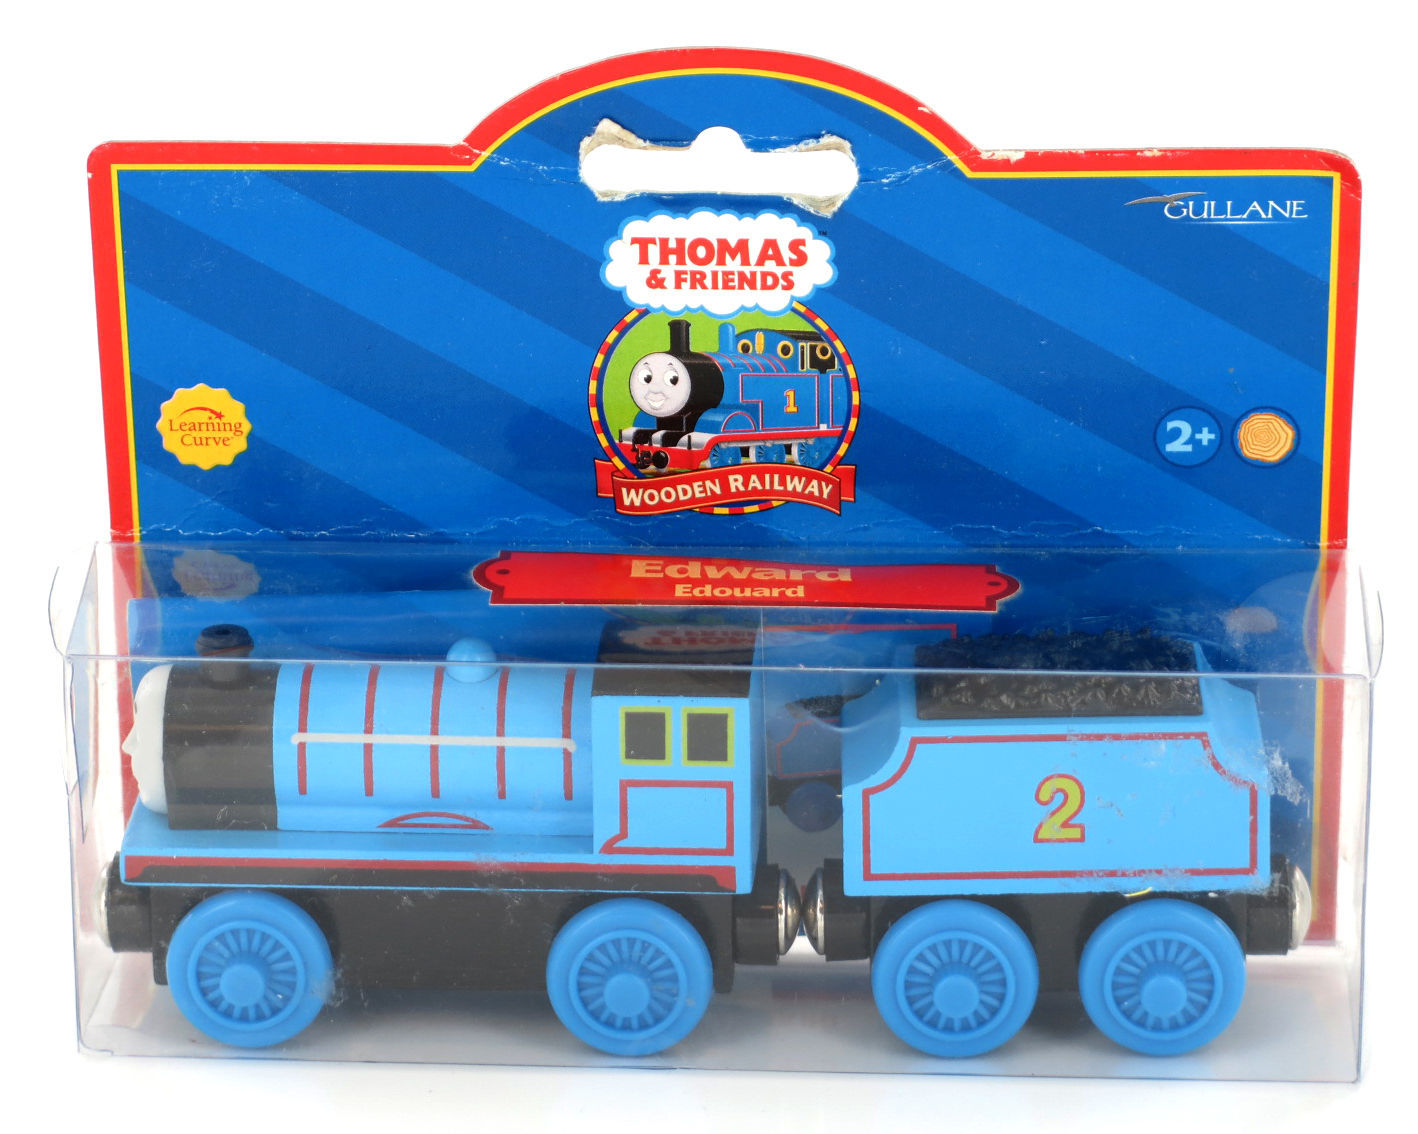 Thomas & Friends Toy (2000s): 1 customer review and 16 listings